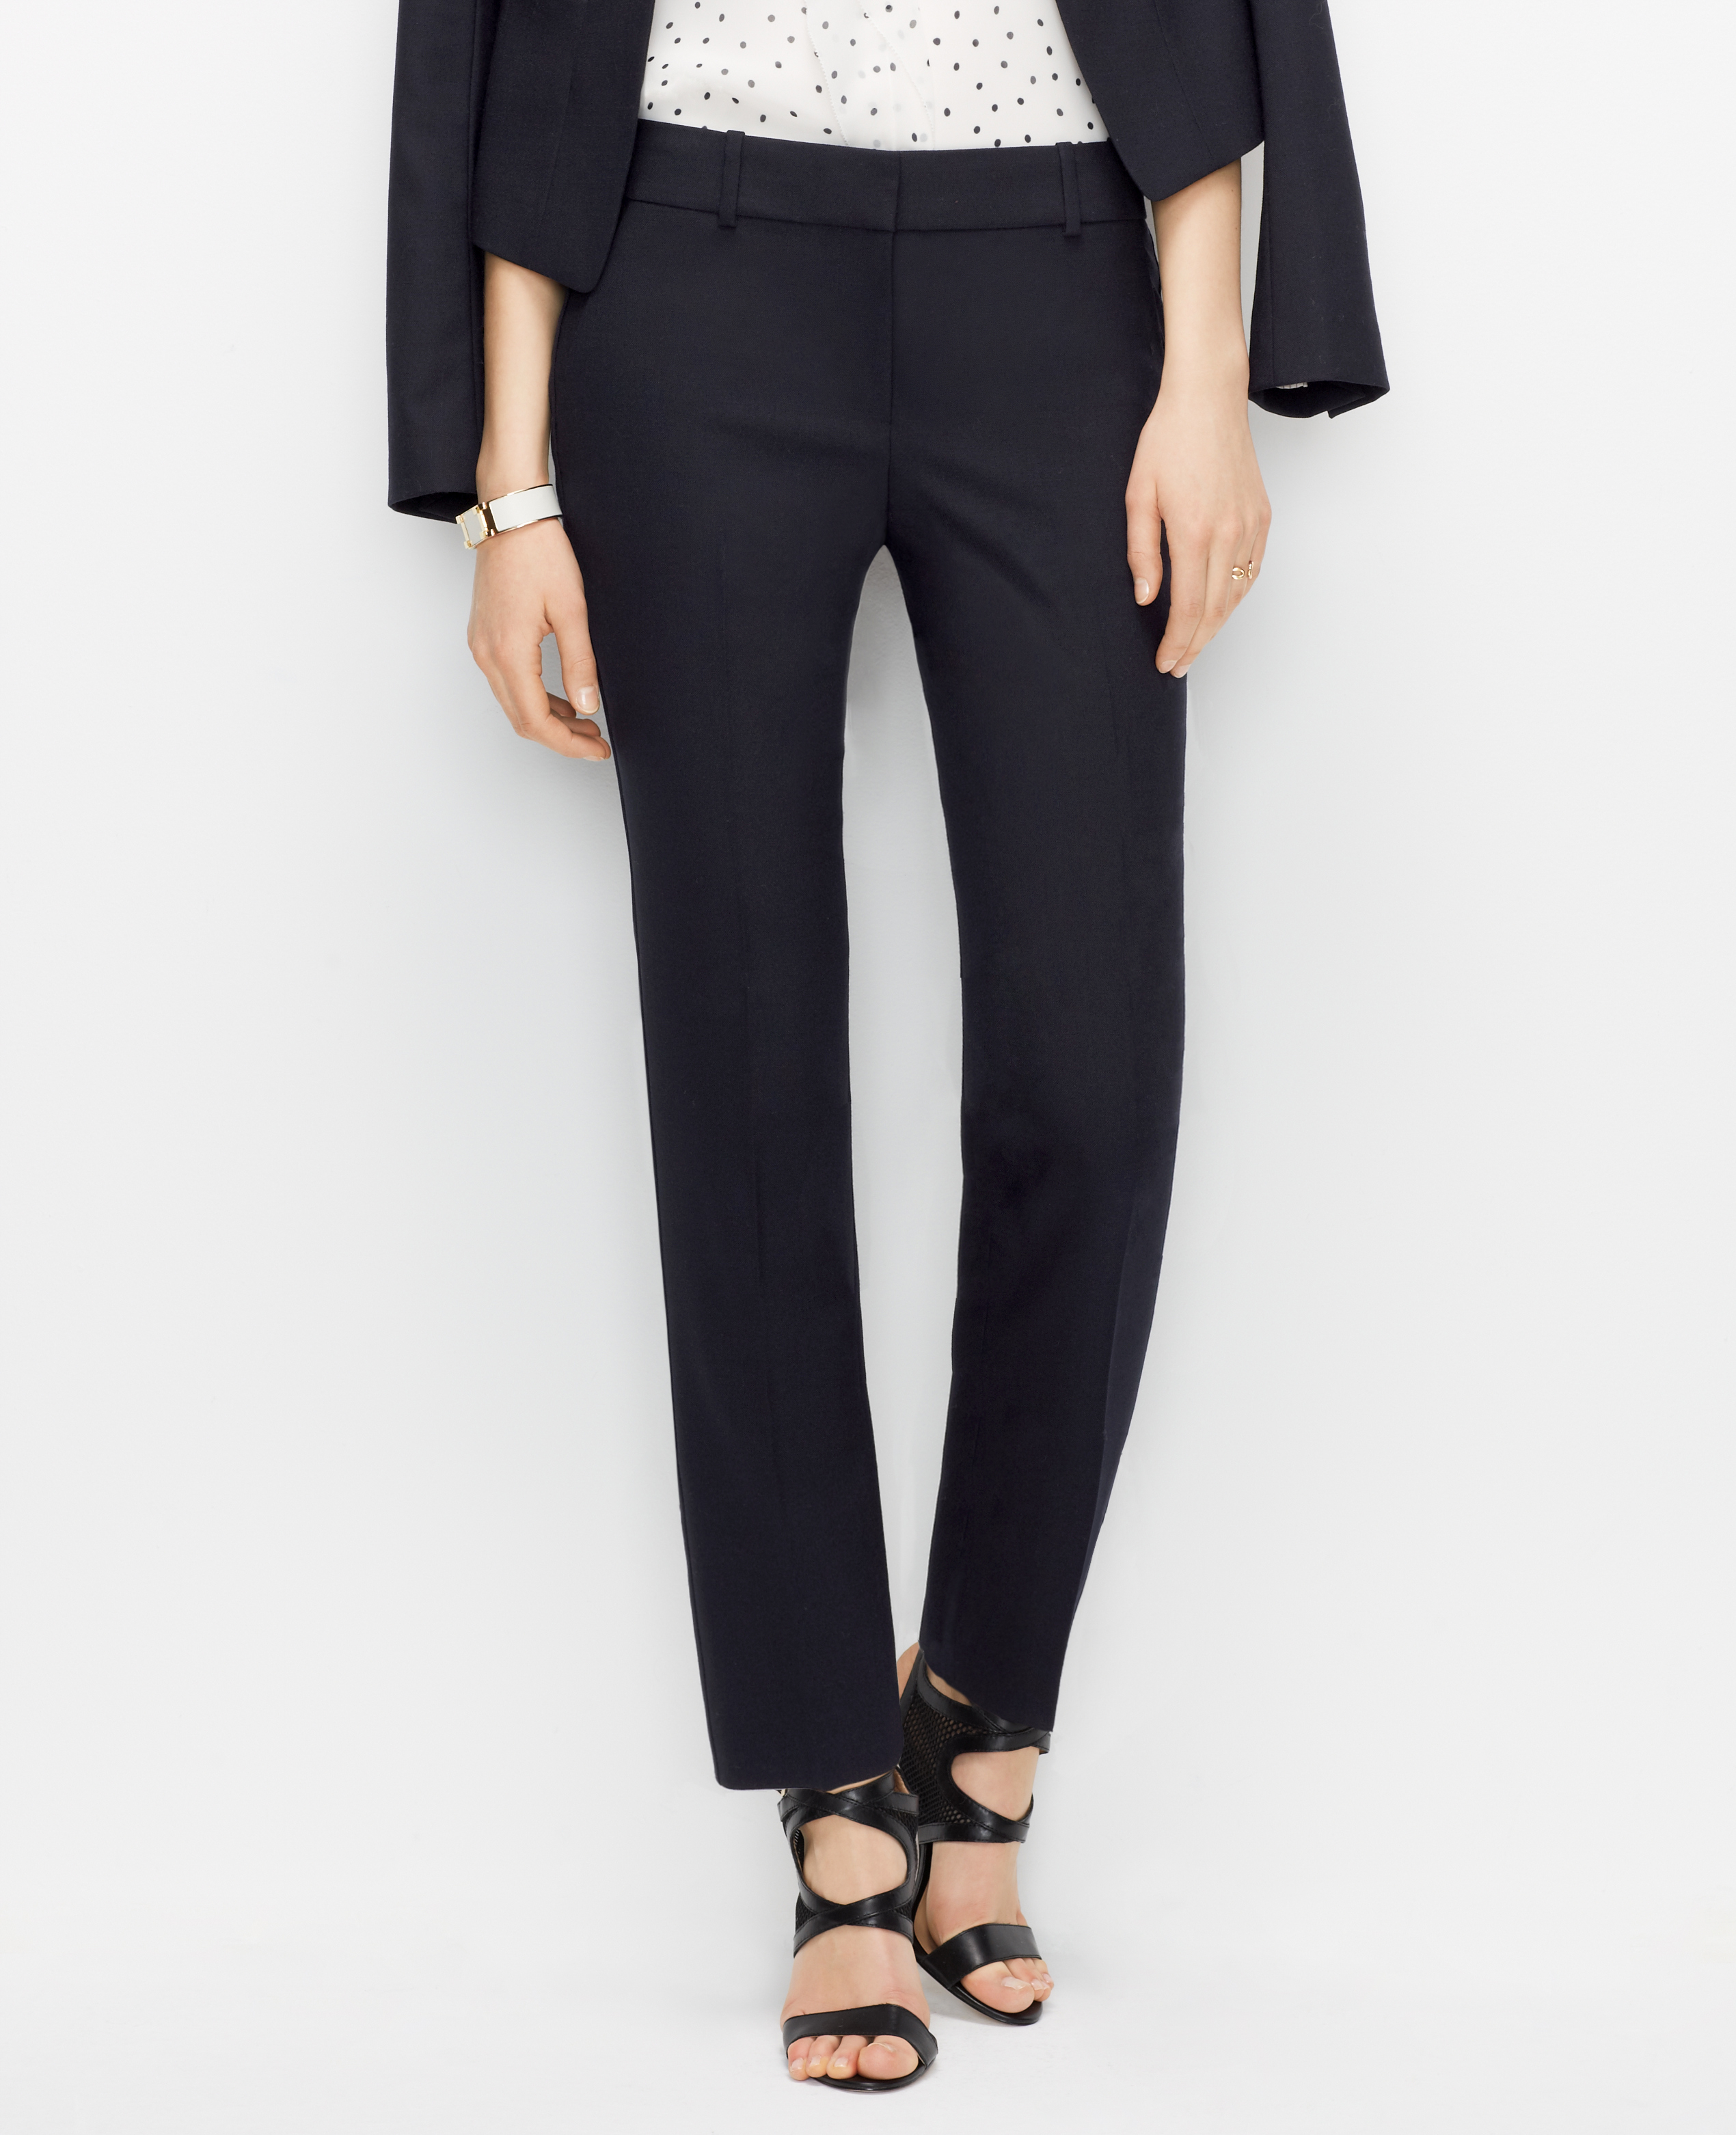 Lyst - Ann taylor Tall Signature Straight Ankle Pants in Blue